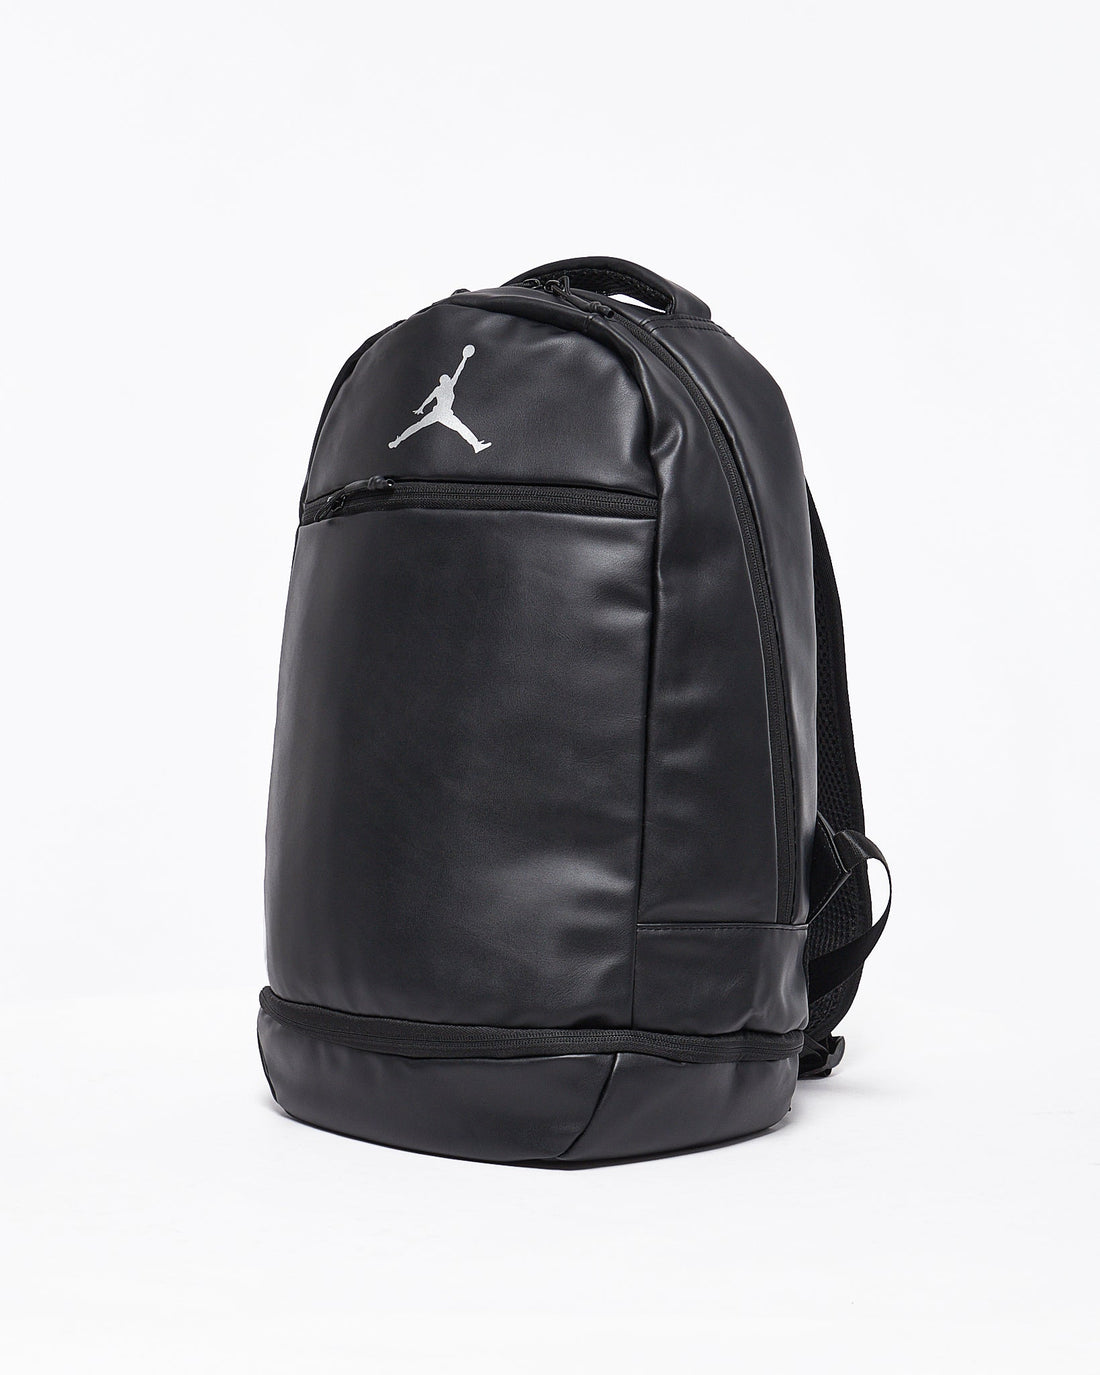 MOI OUTFIT-Jumpman Logo Unisex Backpack 30.90